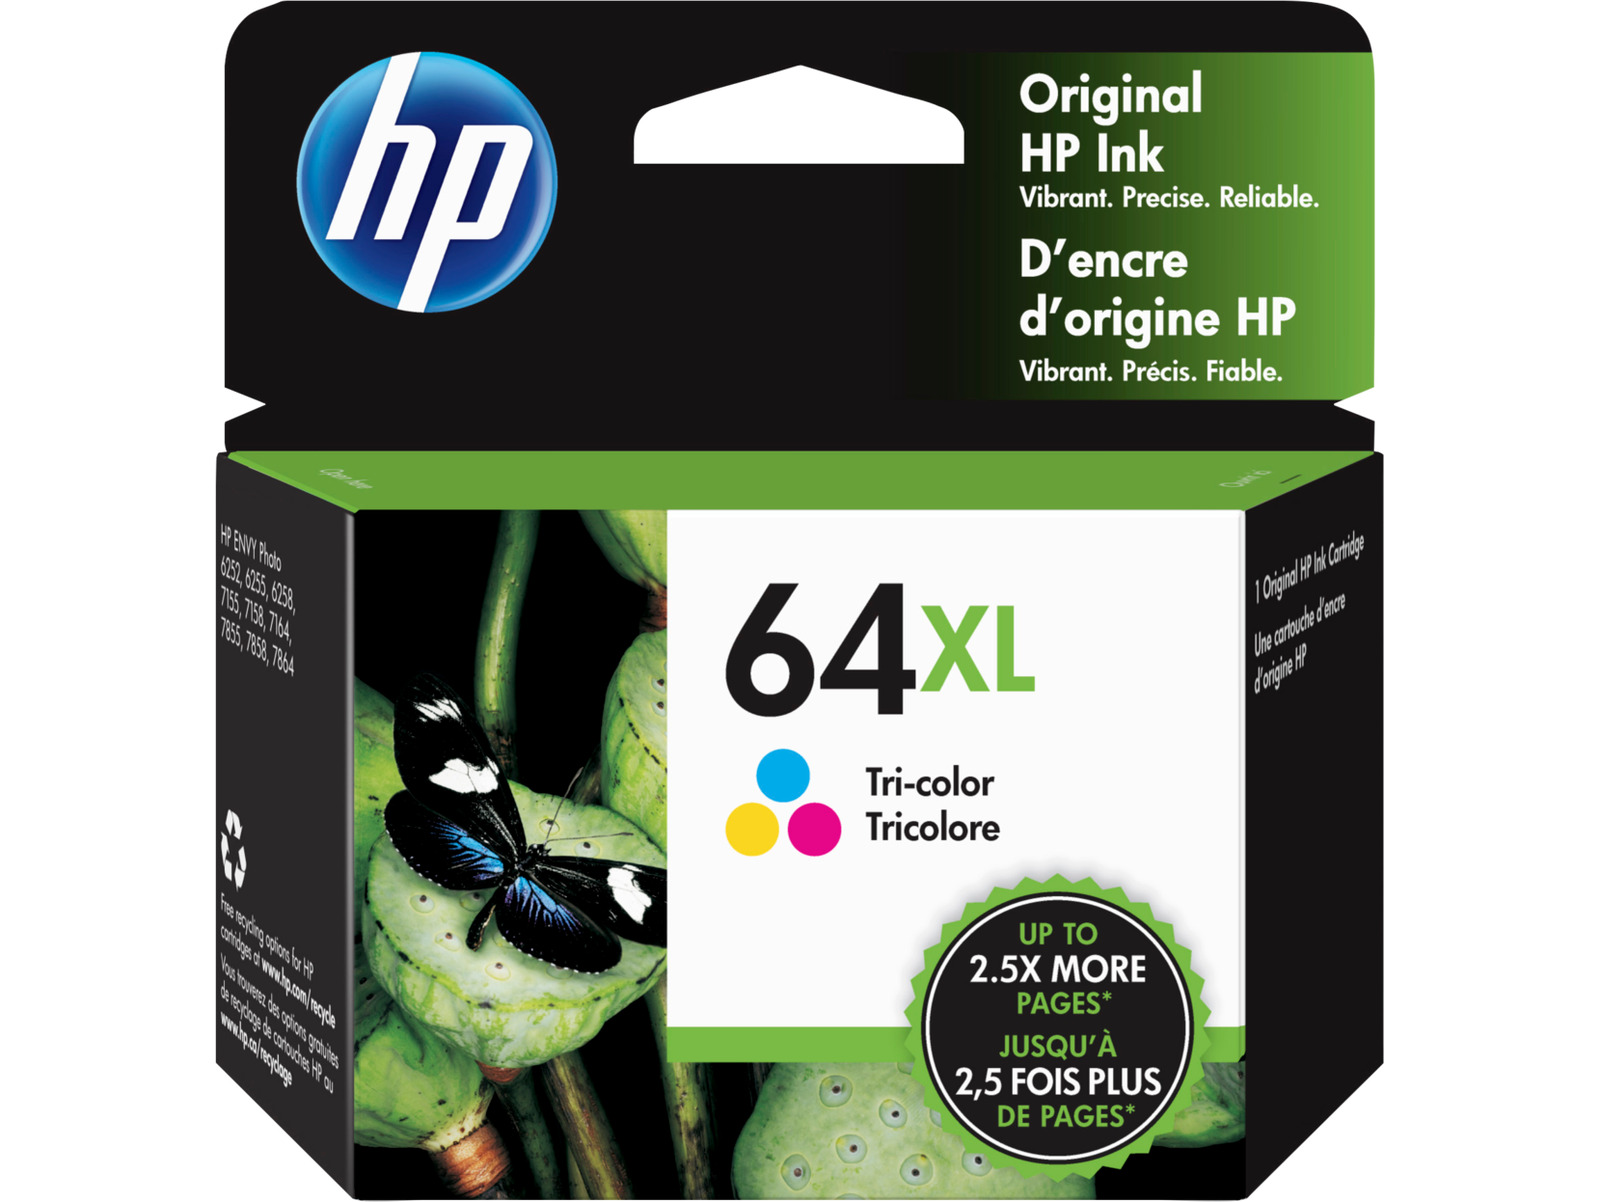 HP 64XL High Yield Tri-color Original Ink Cartridge, ~415 pages, N9J91AN#140